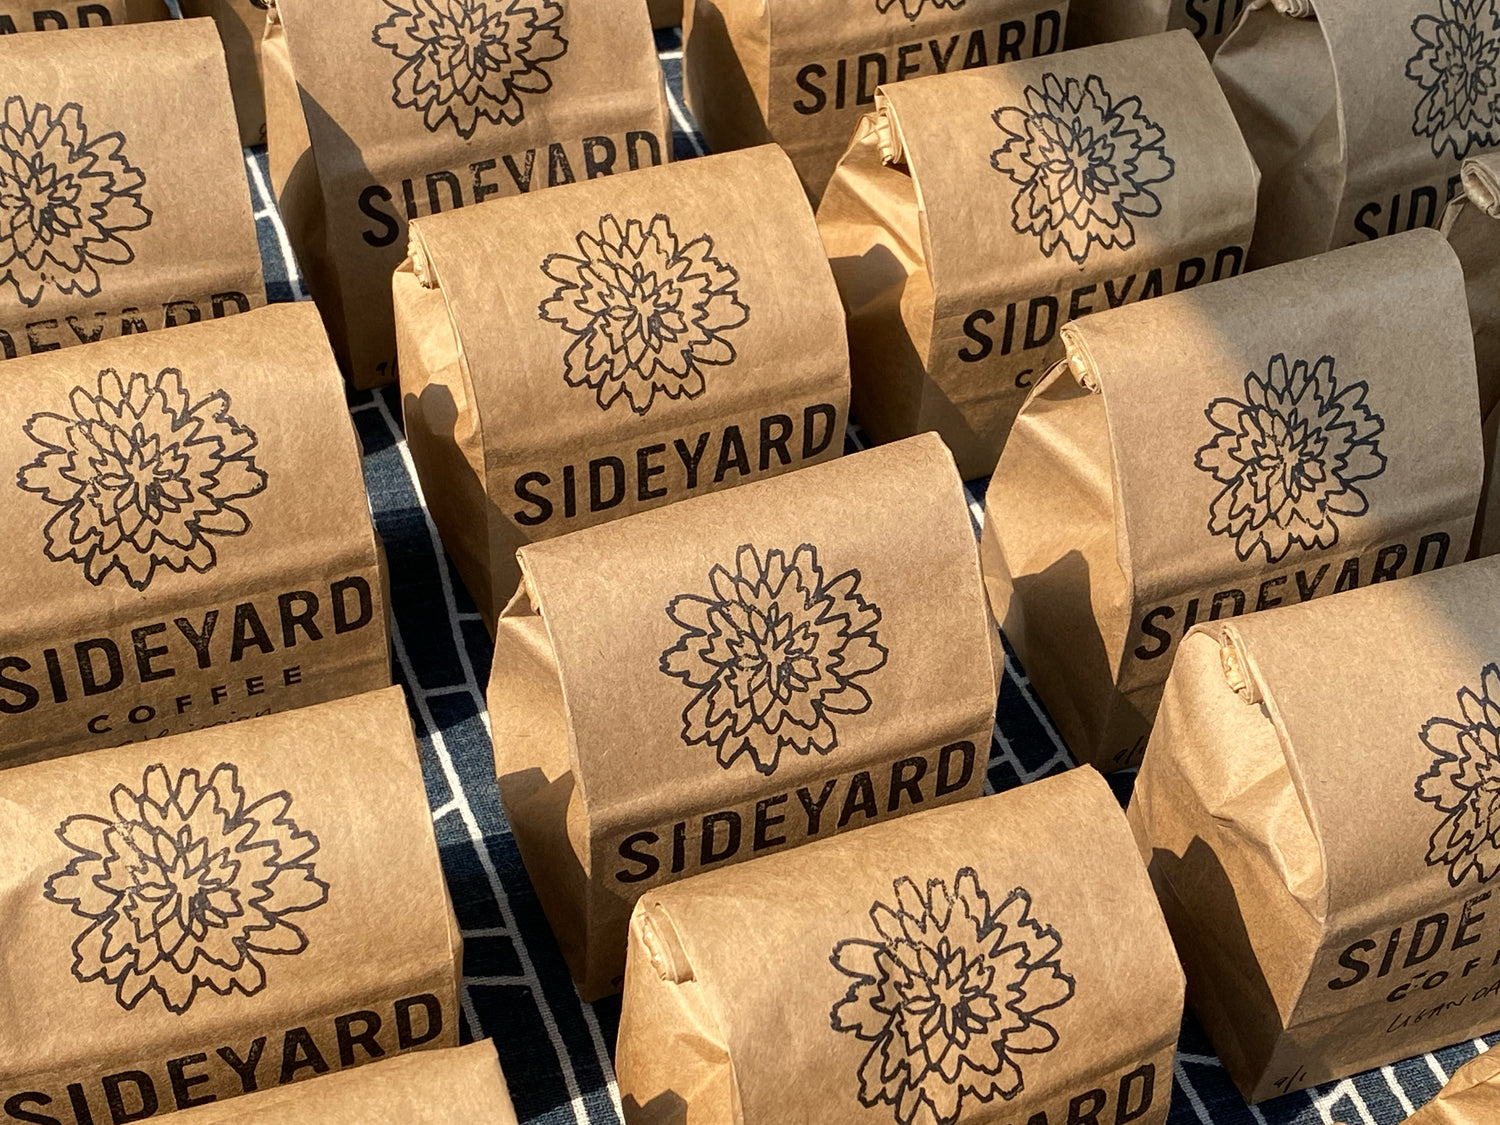 rows of coffee bags, stamped with the Sideyard coffee logo, arranged in a grid and seen from above